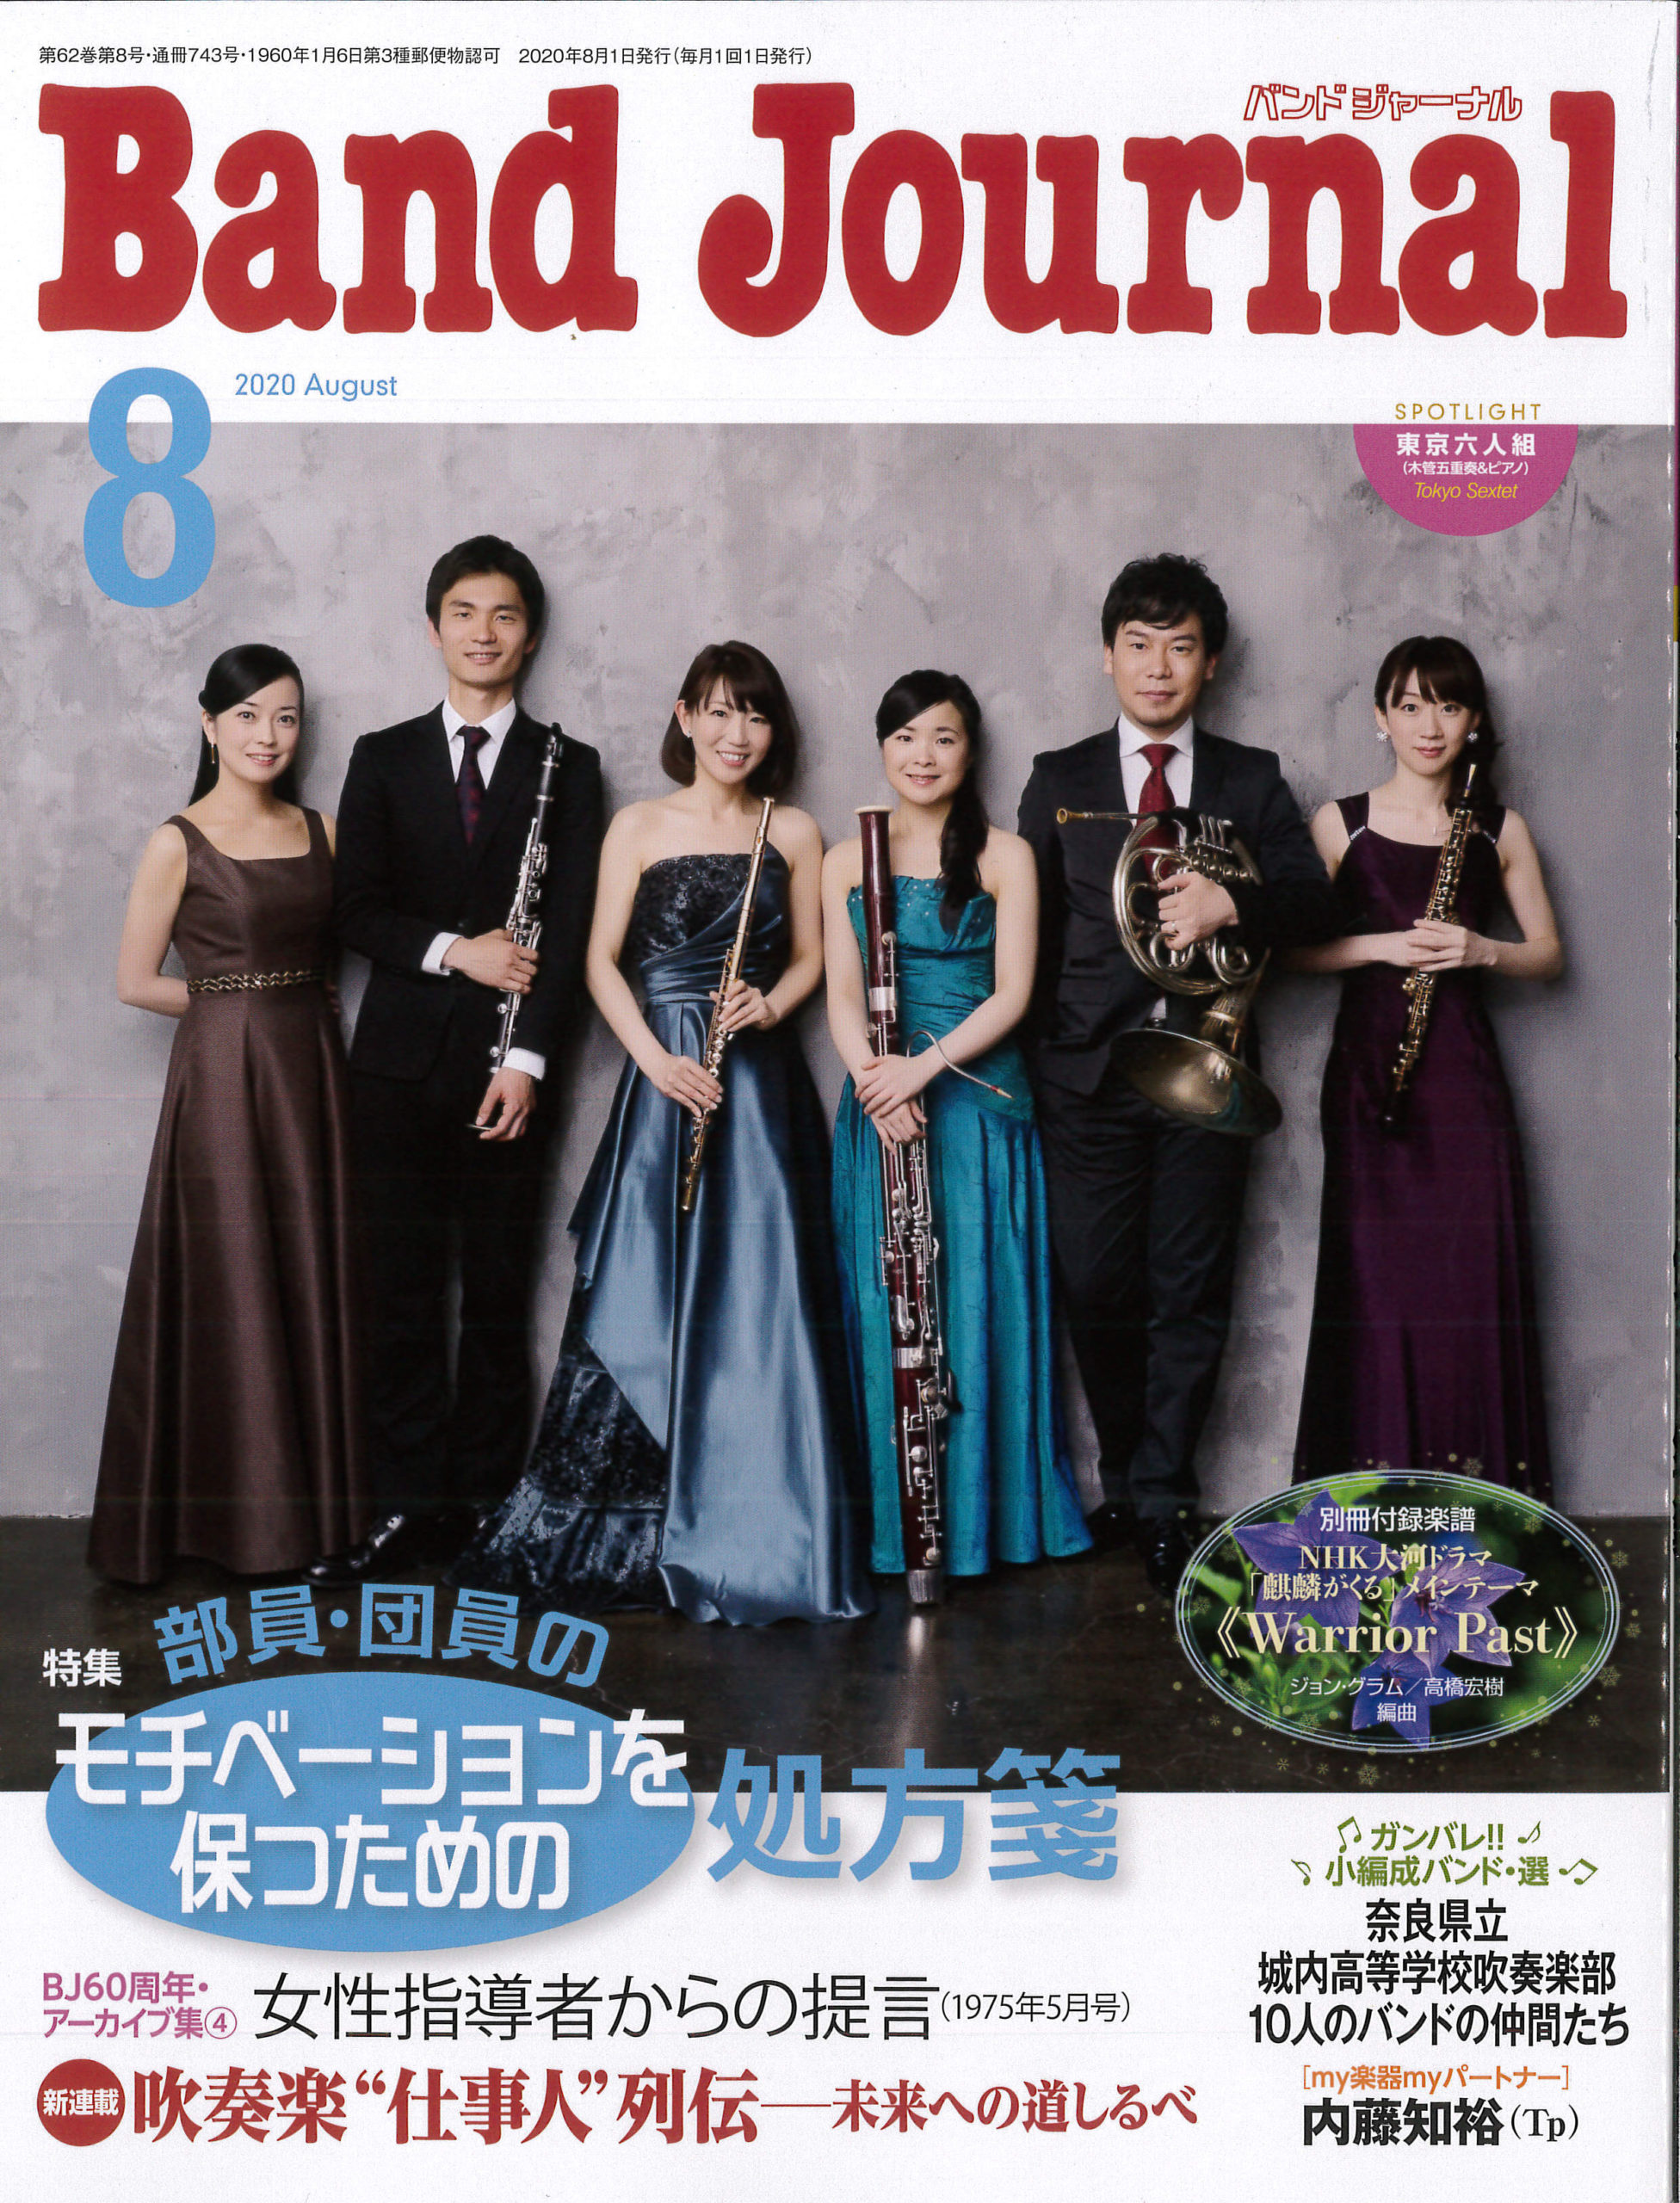 The cover page of 2020 August issue of Band Journal.